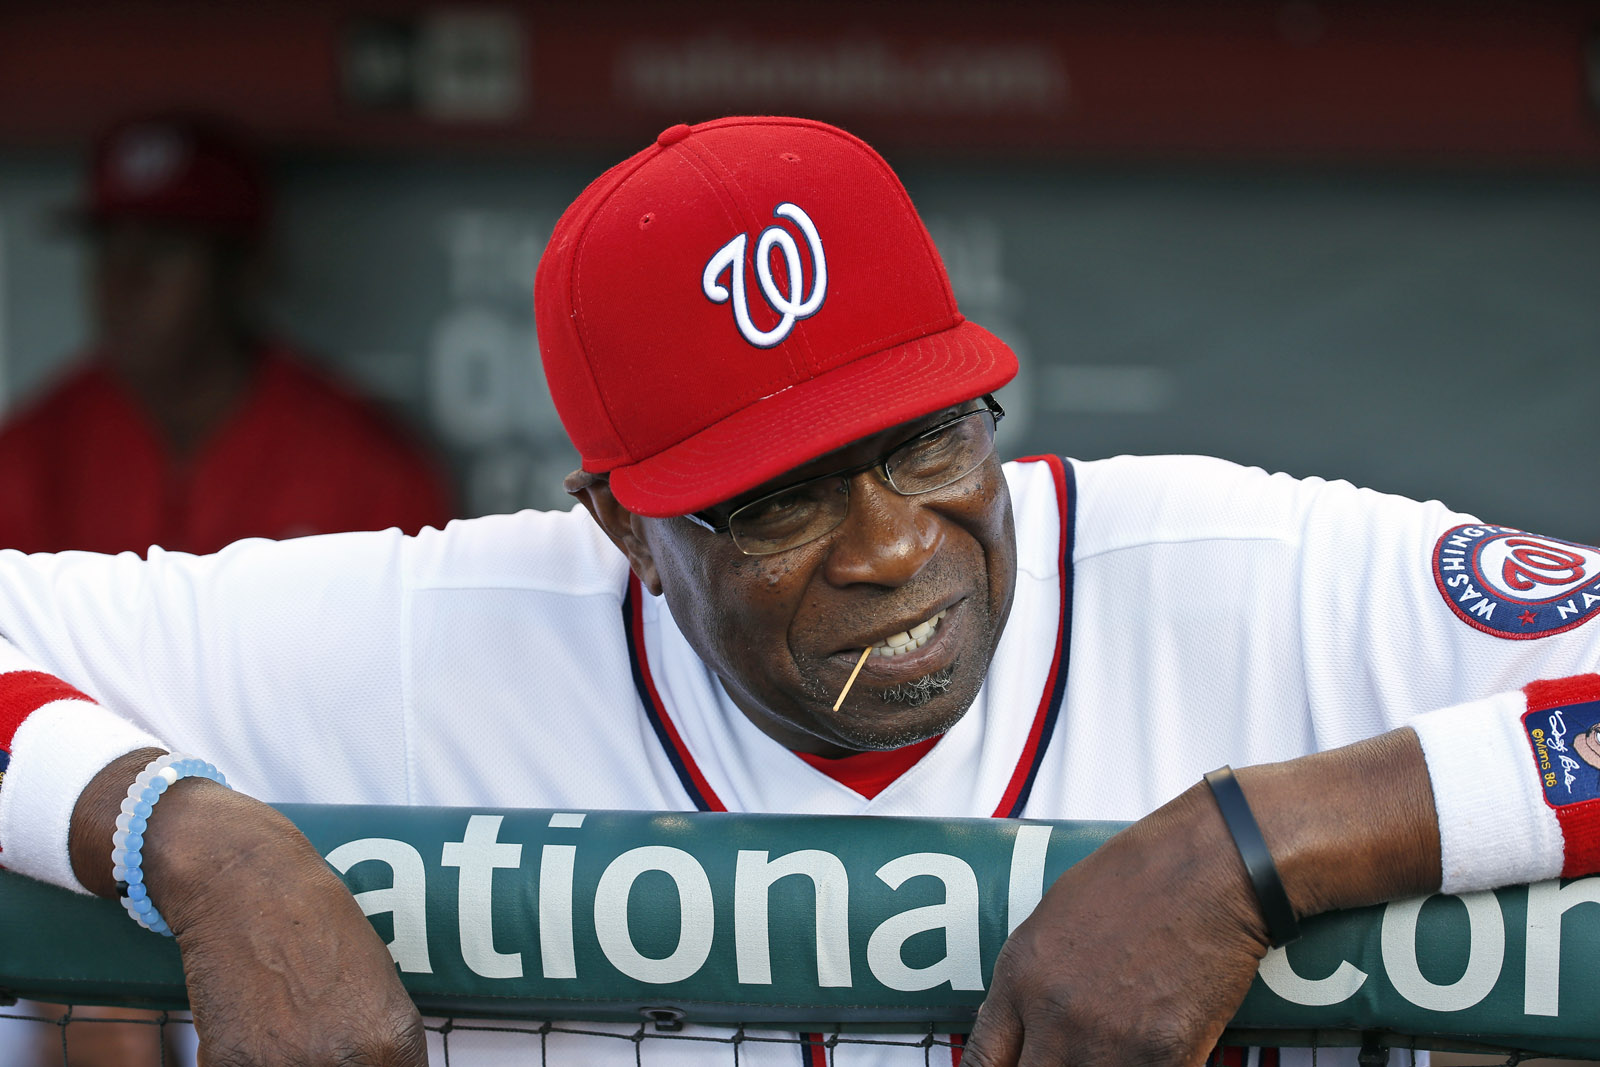 As DC considers chewing tobacco ban, Nats manager weighs in | WTOP